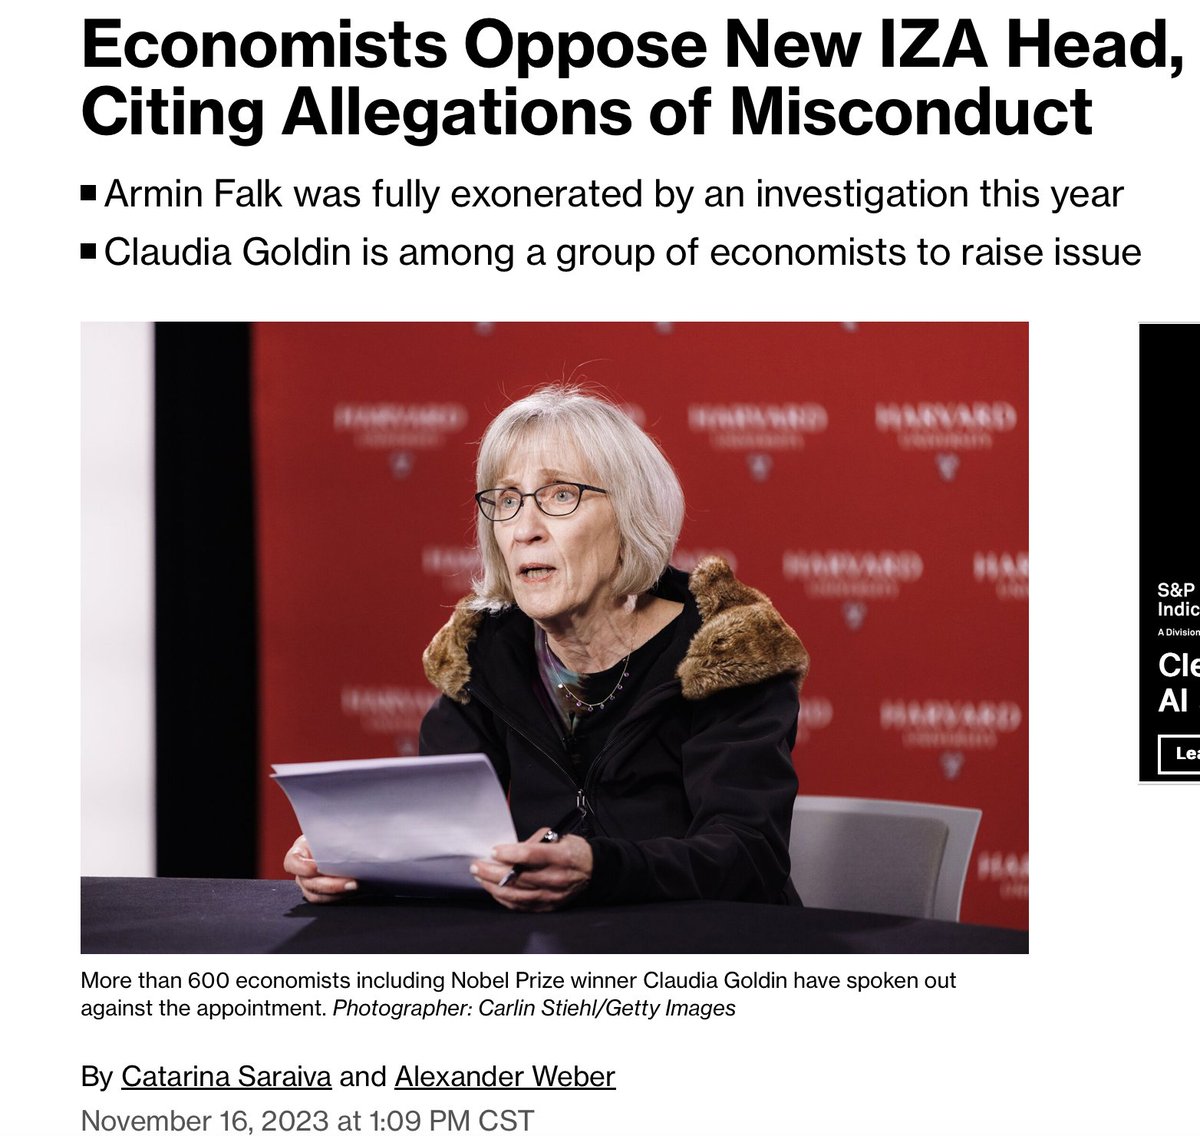 'Fully exonerated' keeps being repeated by Falk-related spokesmen. I don't think that word means what they think it means. Great coverage of the IZA issue in Bloomberg. bloomberg.com/news/articles/…